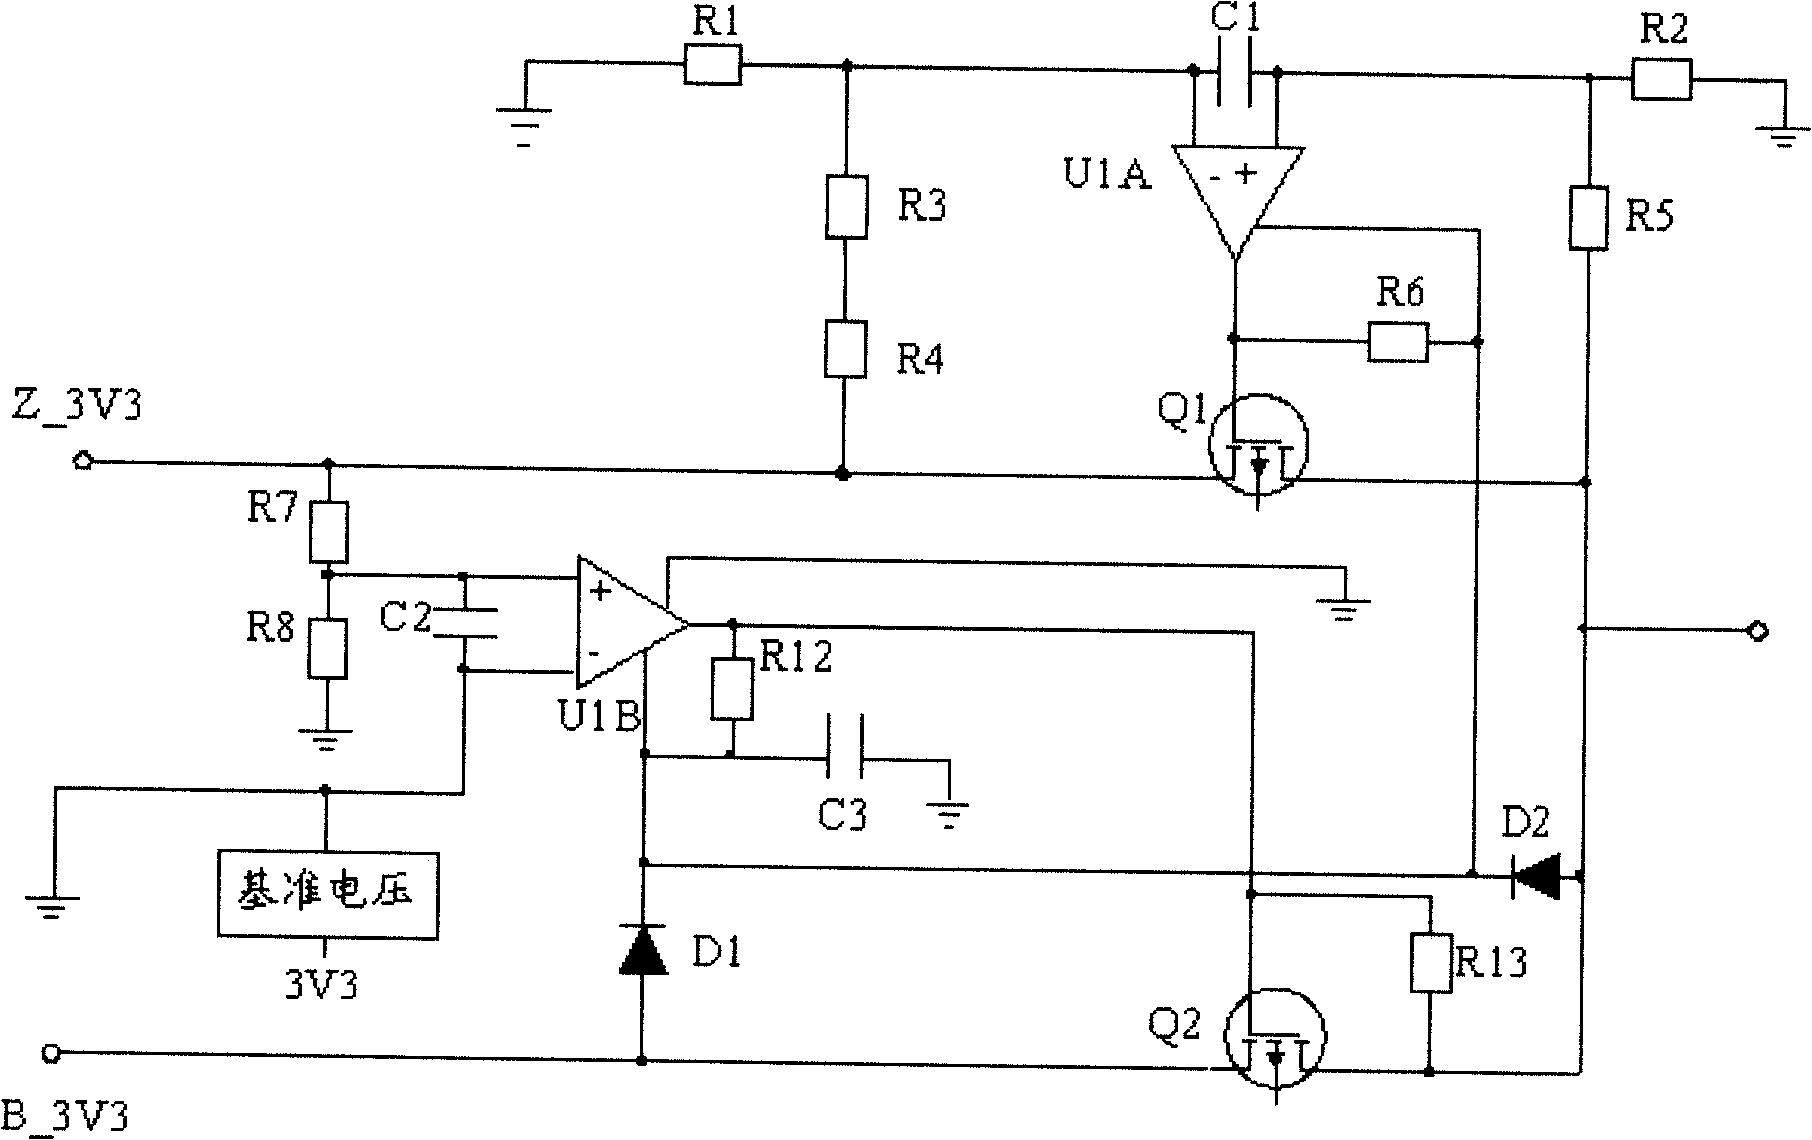 Controller for switching main power supply